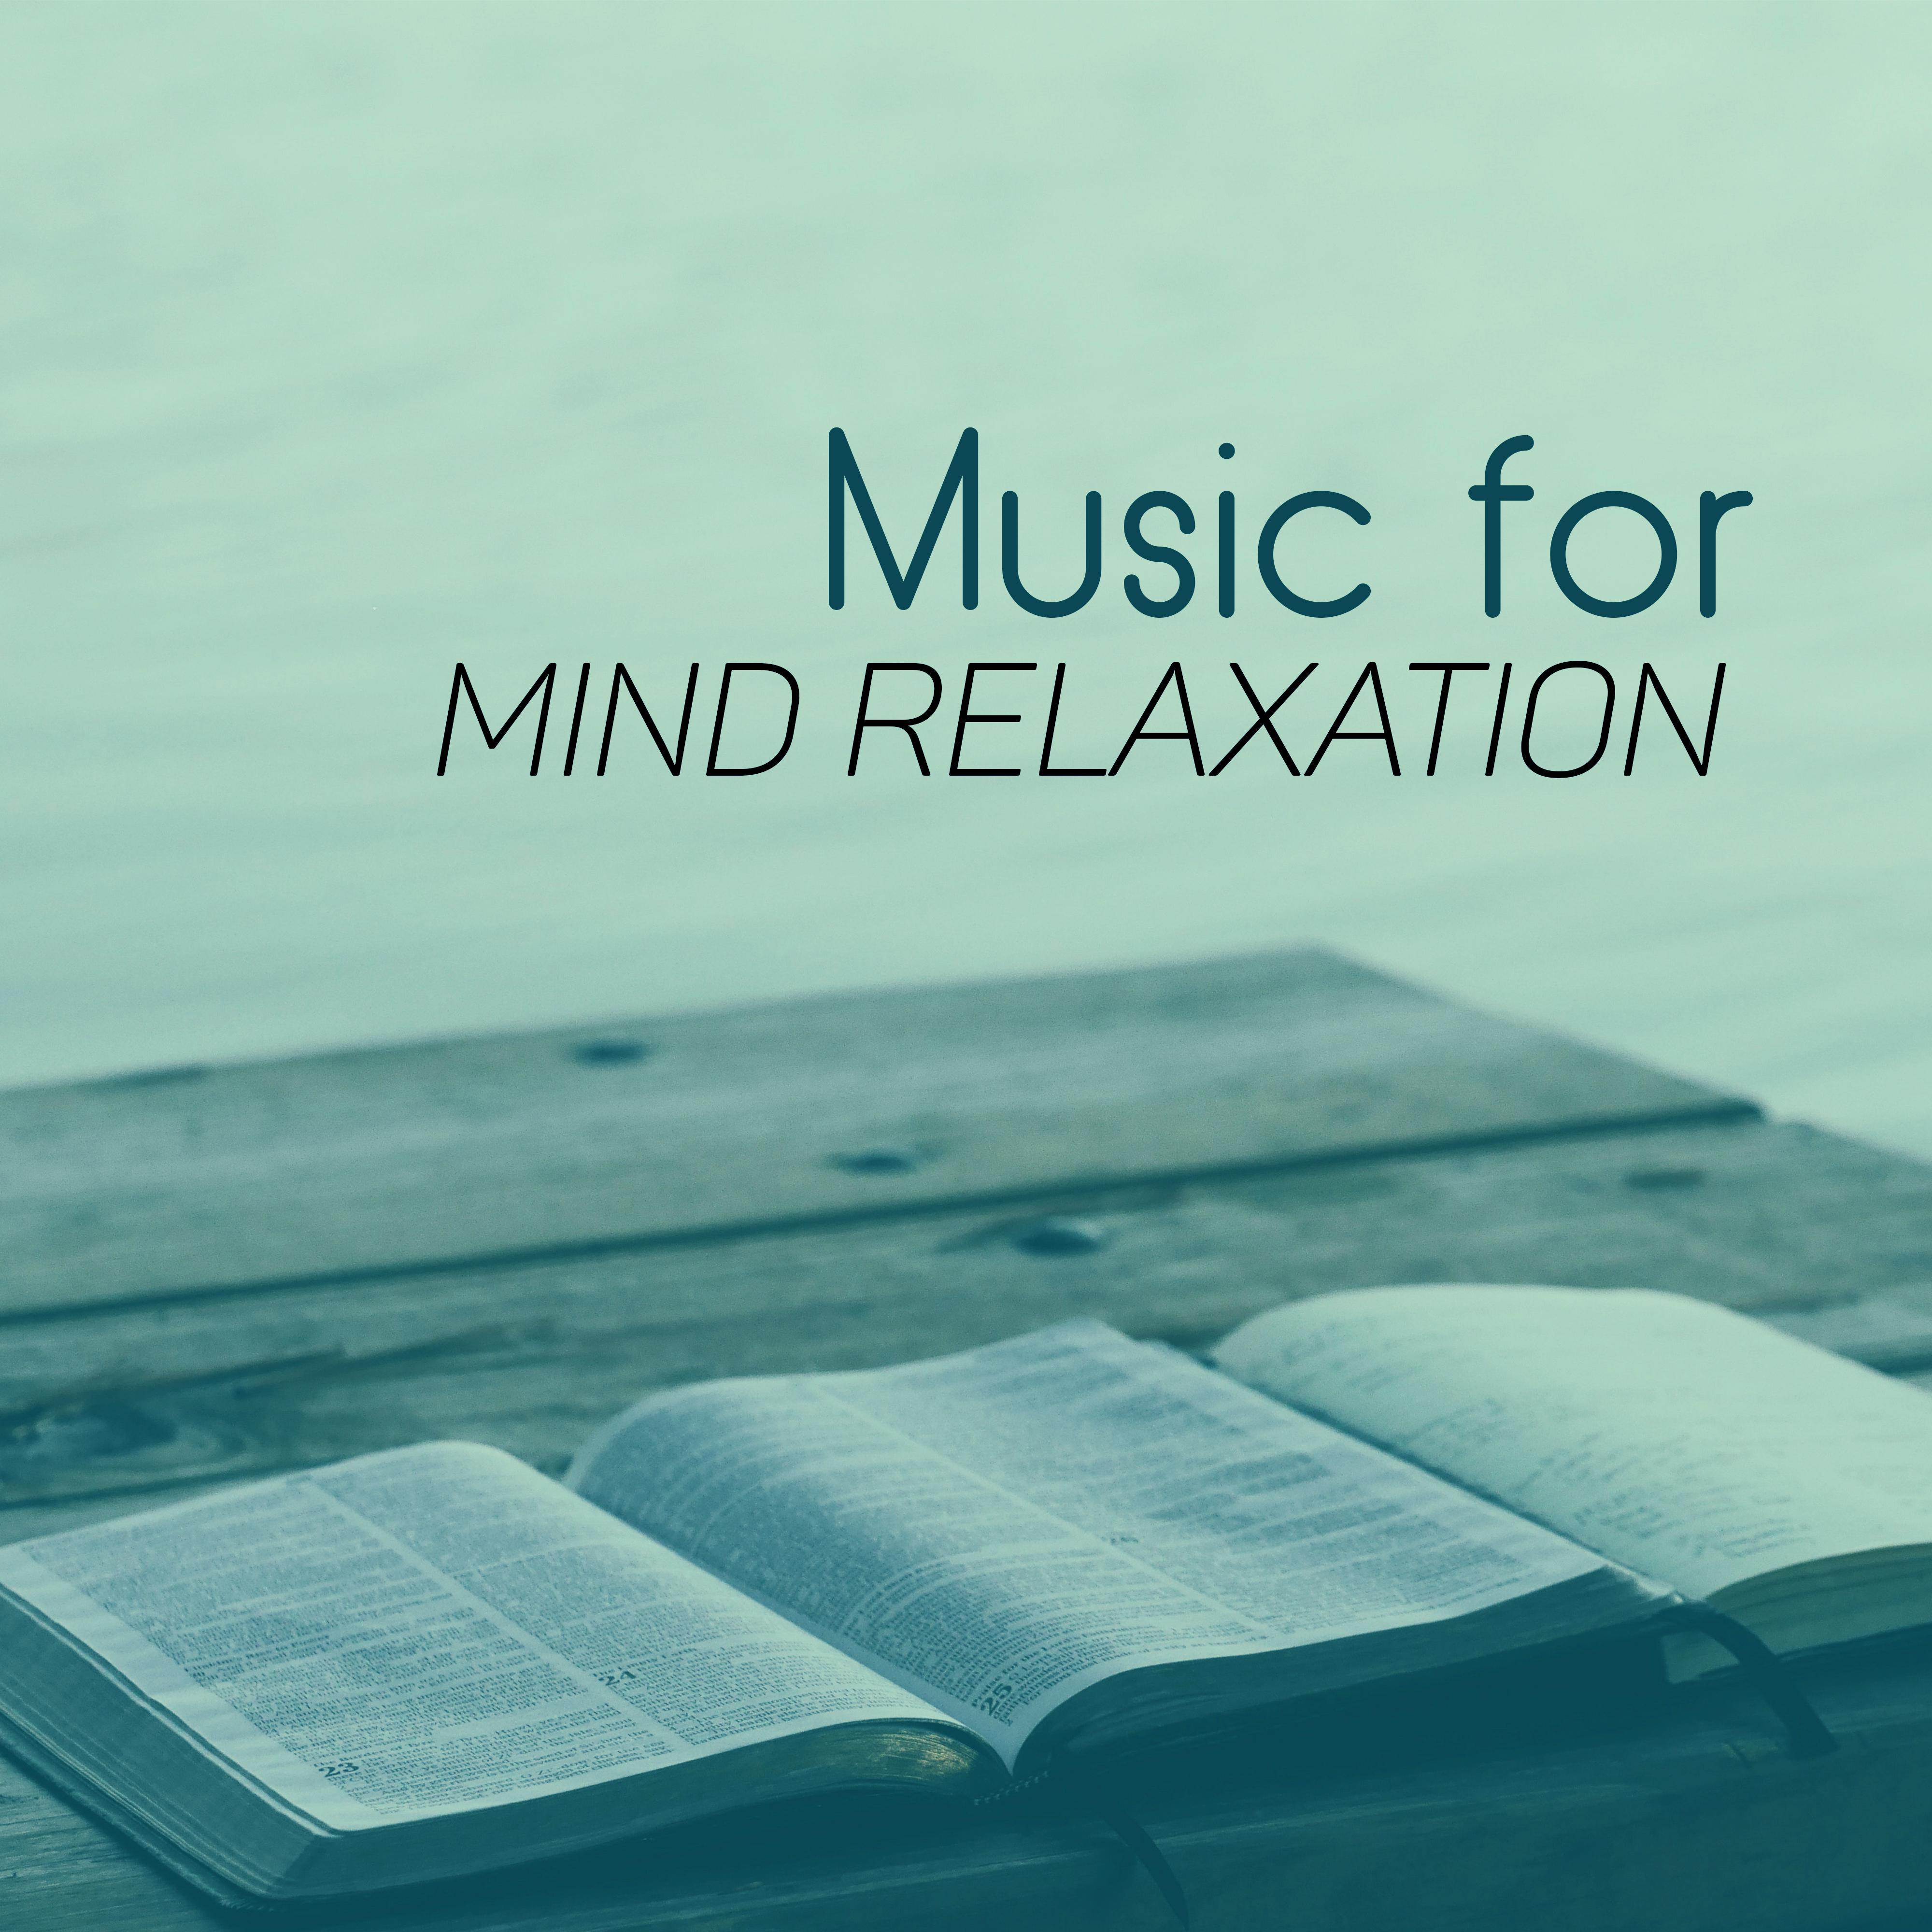 Music for Mind Relaxation – Easy Listening Classical Music, Sounds to Relax, Peaceful Songs